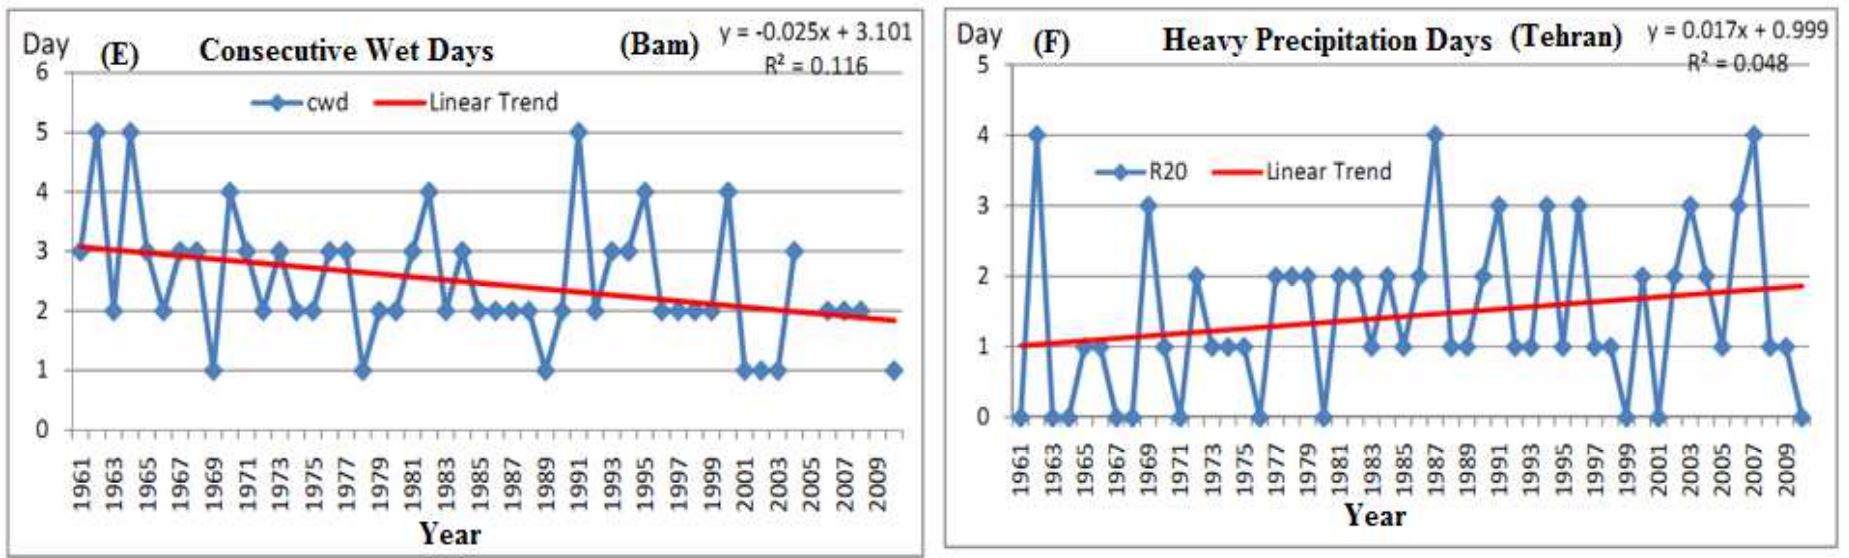 Time series trends of precipitation extremes in different stations, consecutive wet days, heavy precipitation days, Bam, Tehran